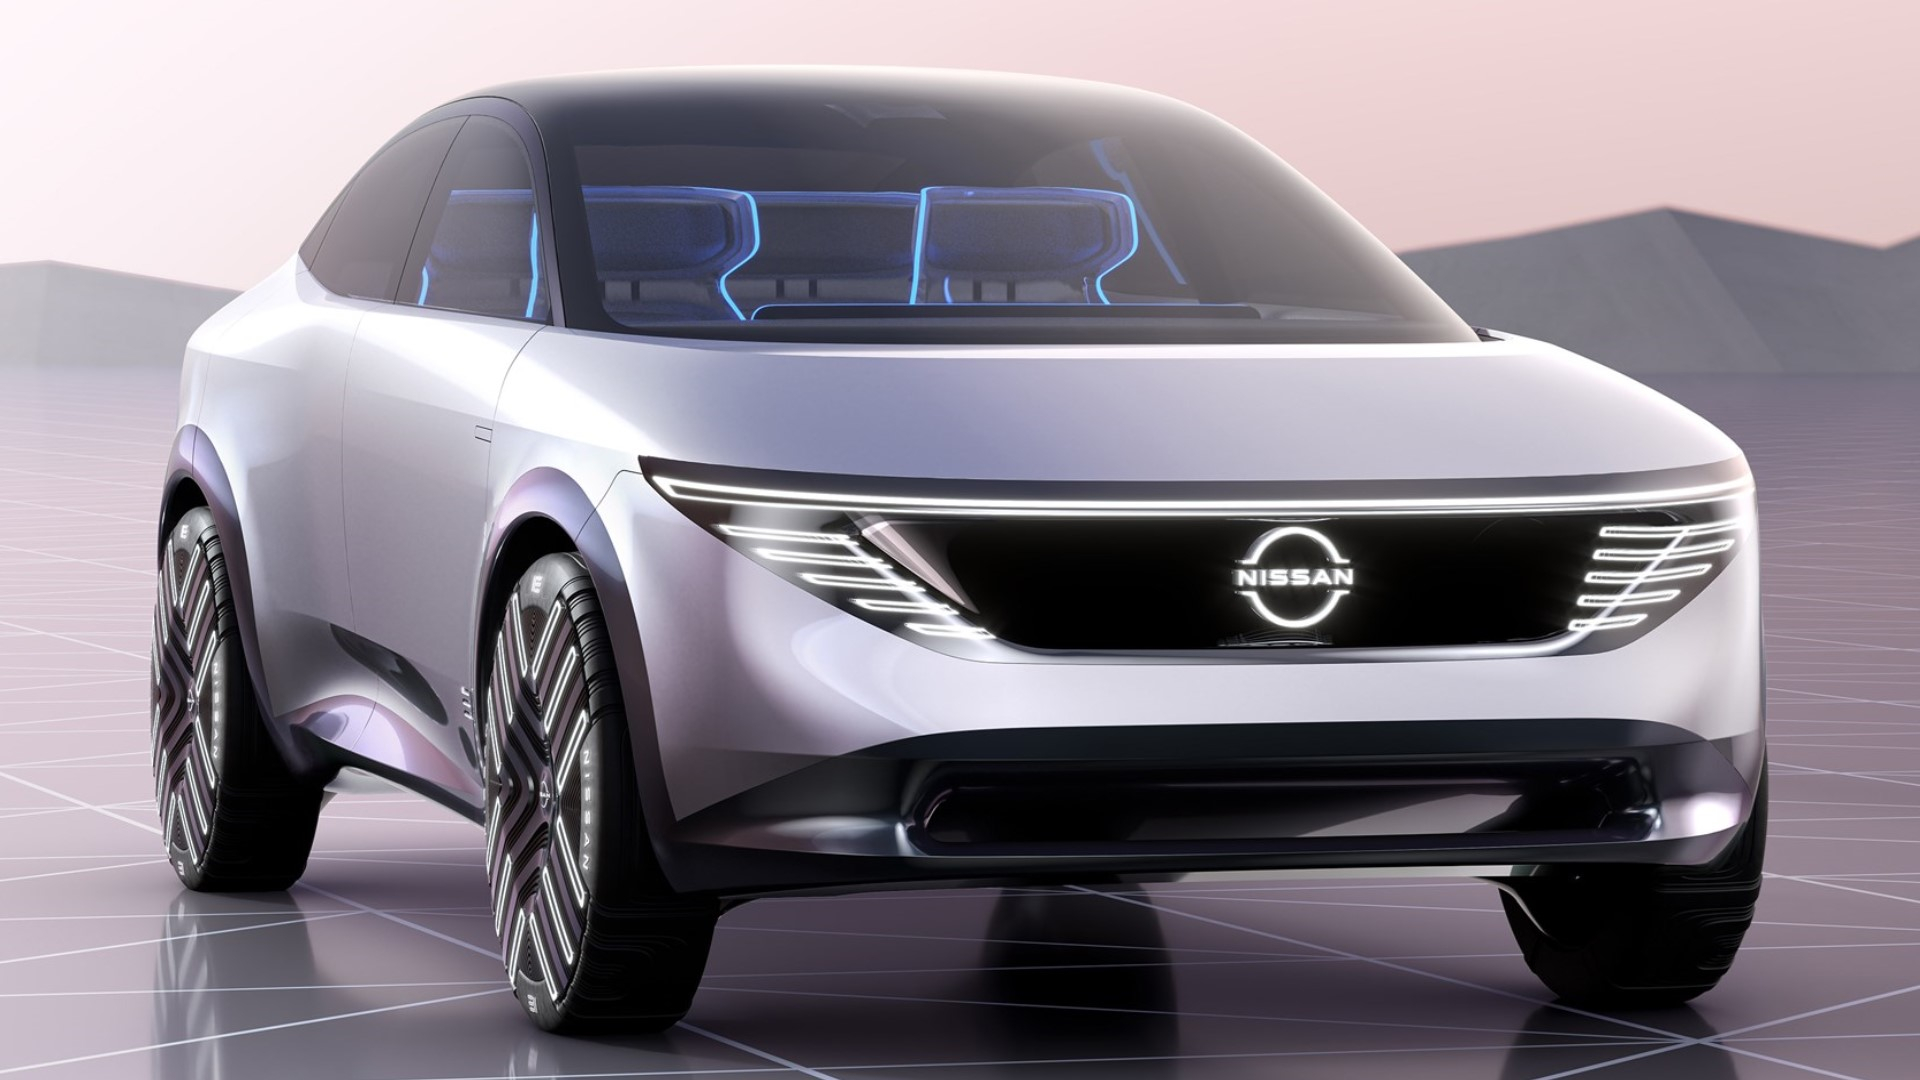 Nissan will launch 16 new electric and hybrid models by 2027